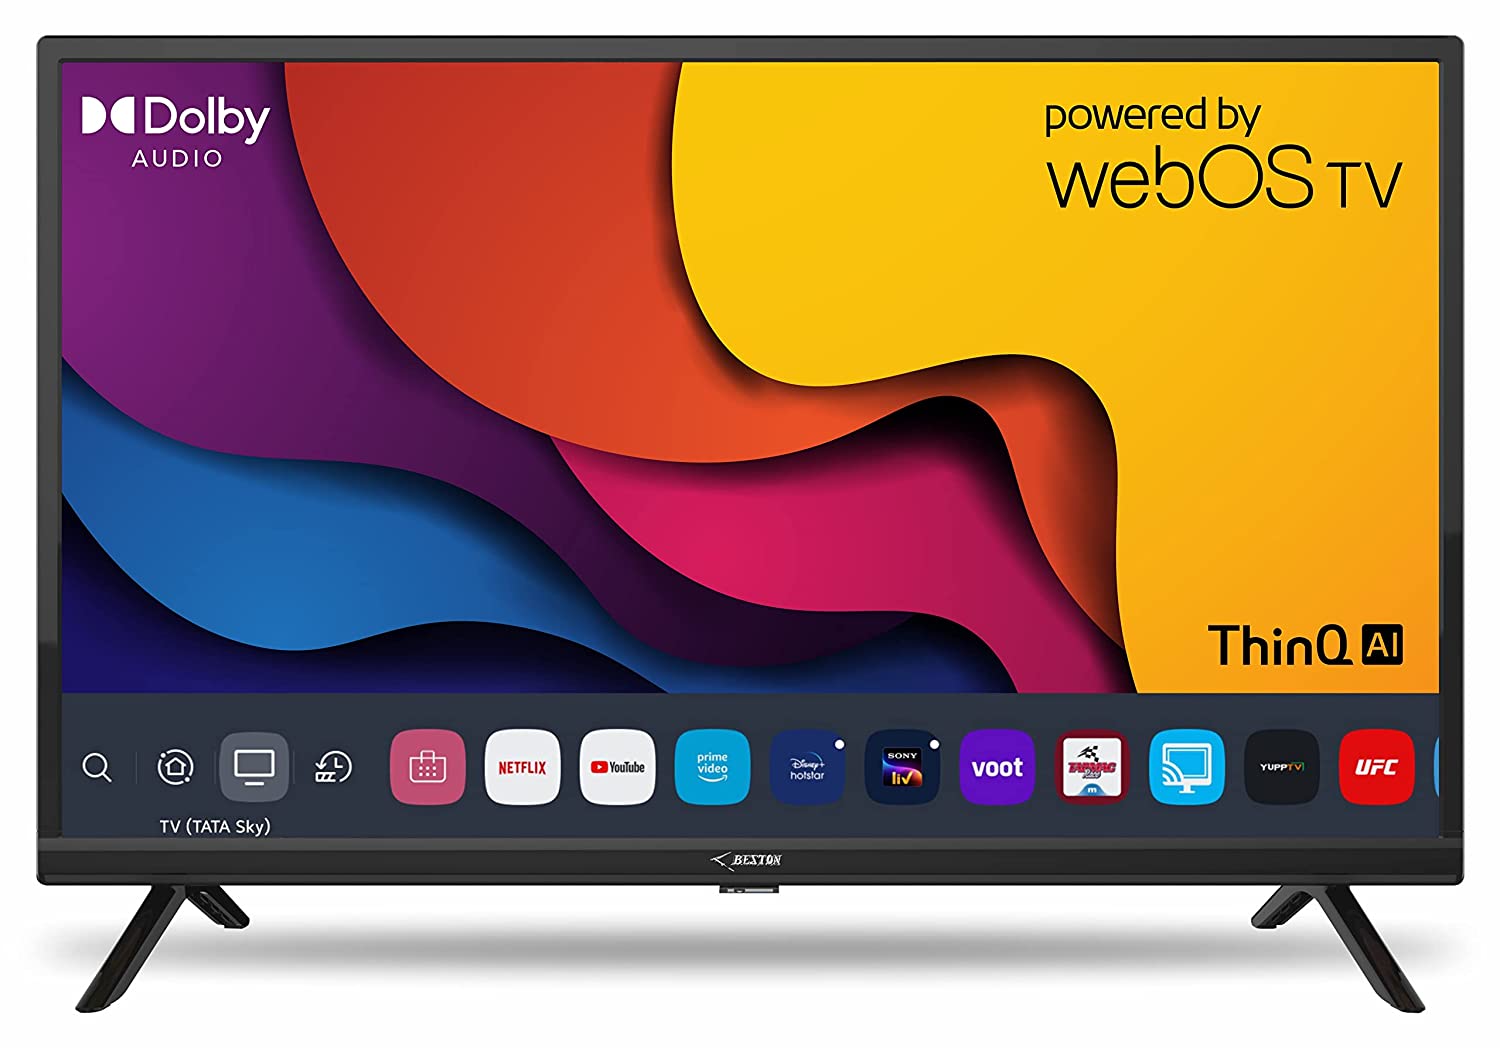 Beston 80 cm (32 inches) HD Ready Smart LED TV BS32HW1 (Black) (2022 Model) | Powered by WebOS